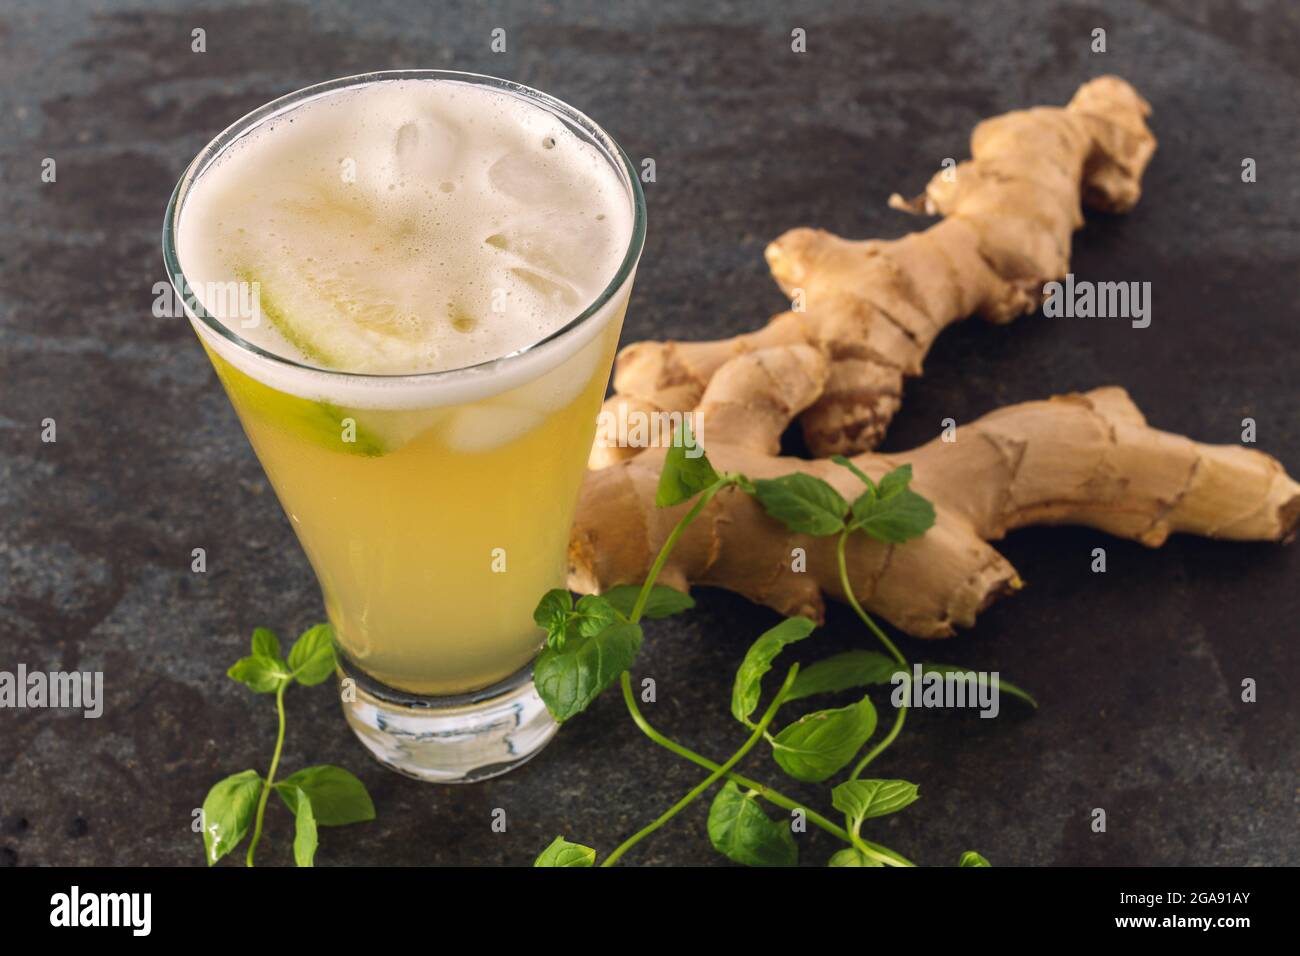 A glass of ginger beer Stock Photo